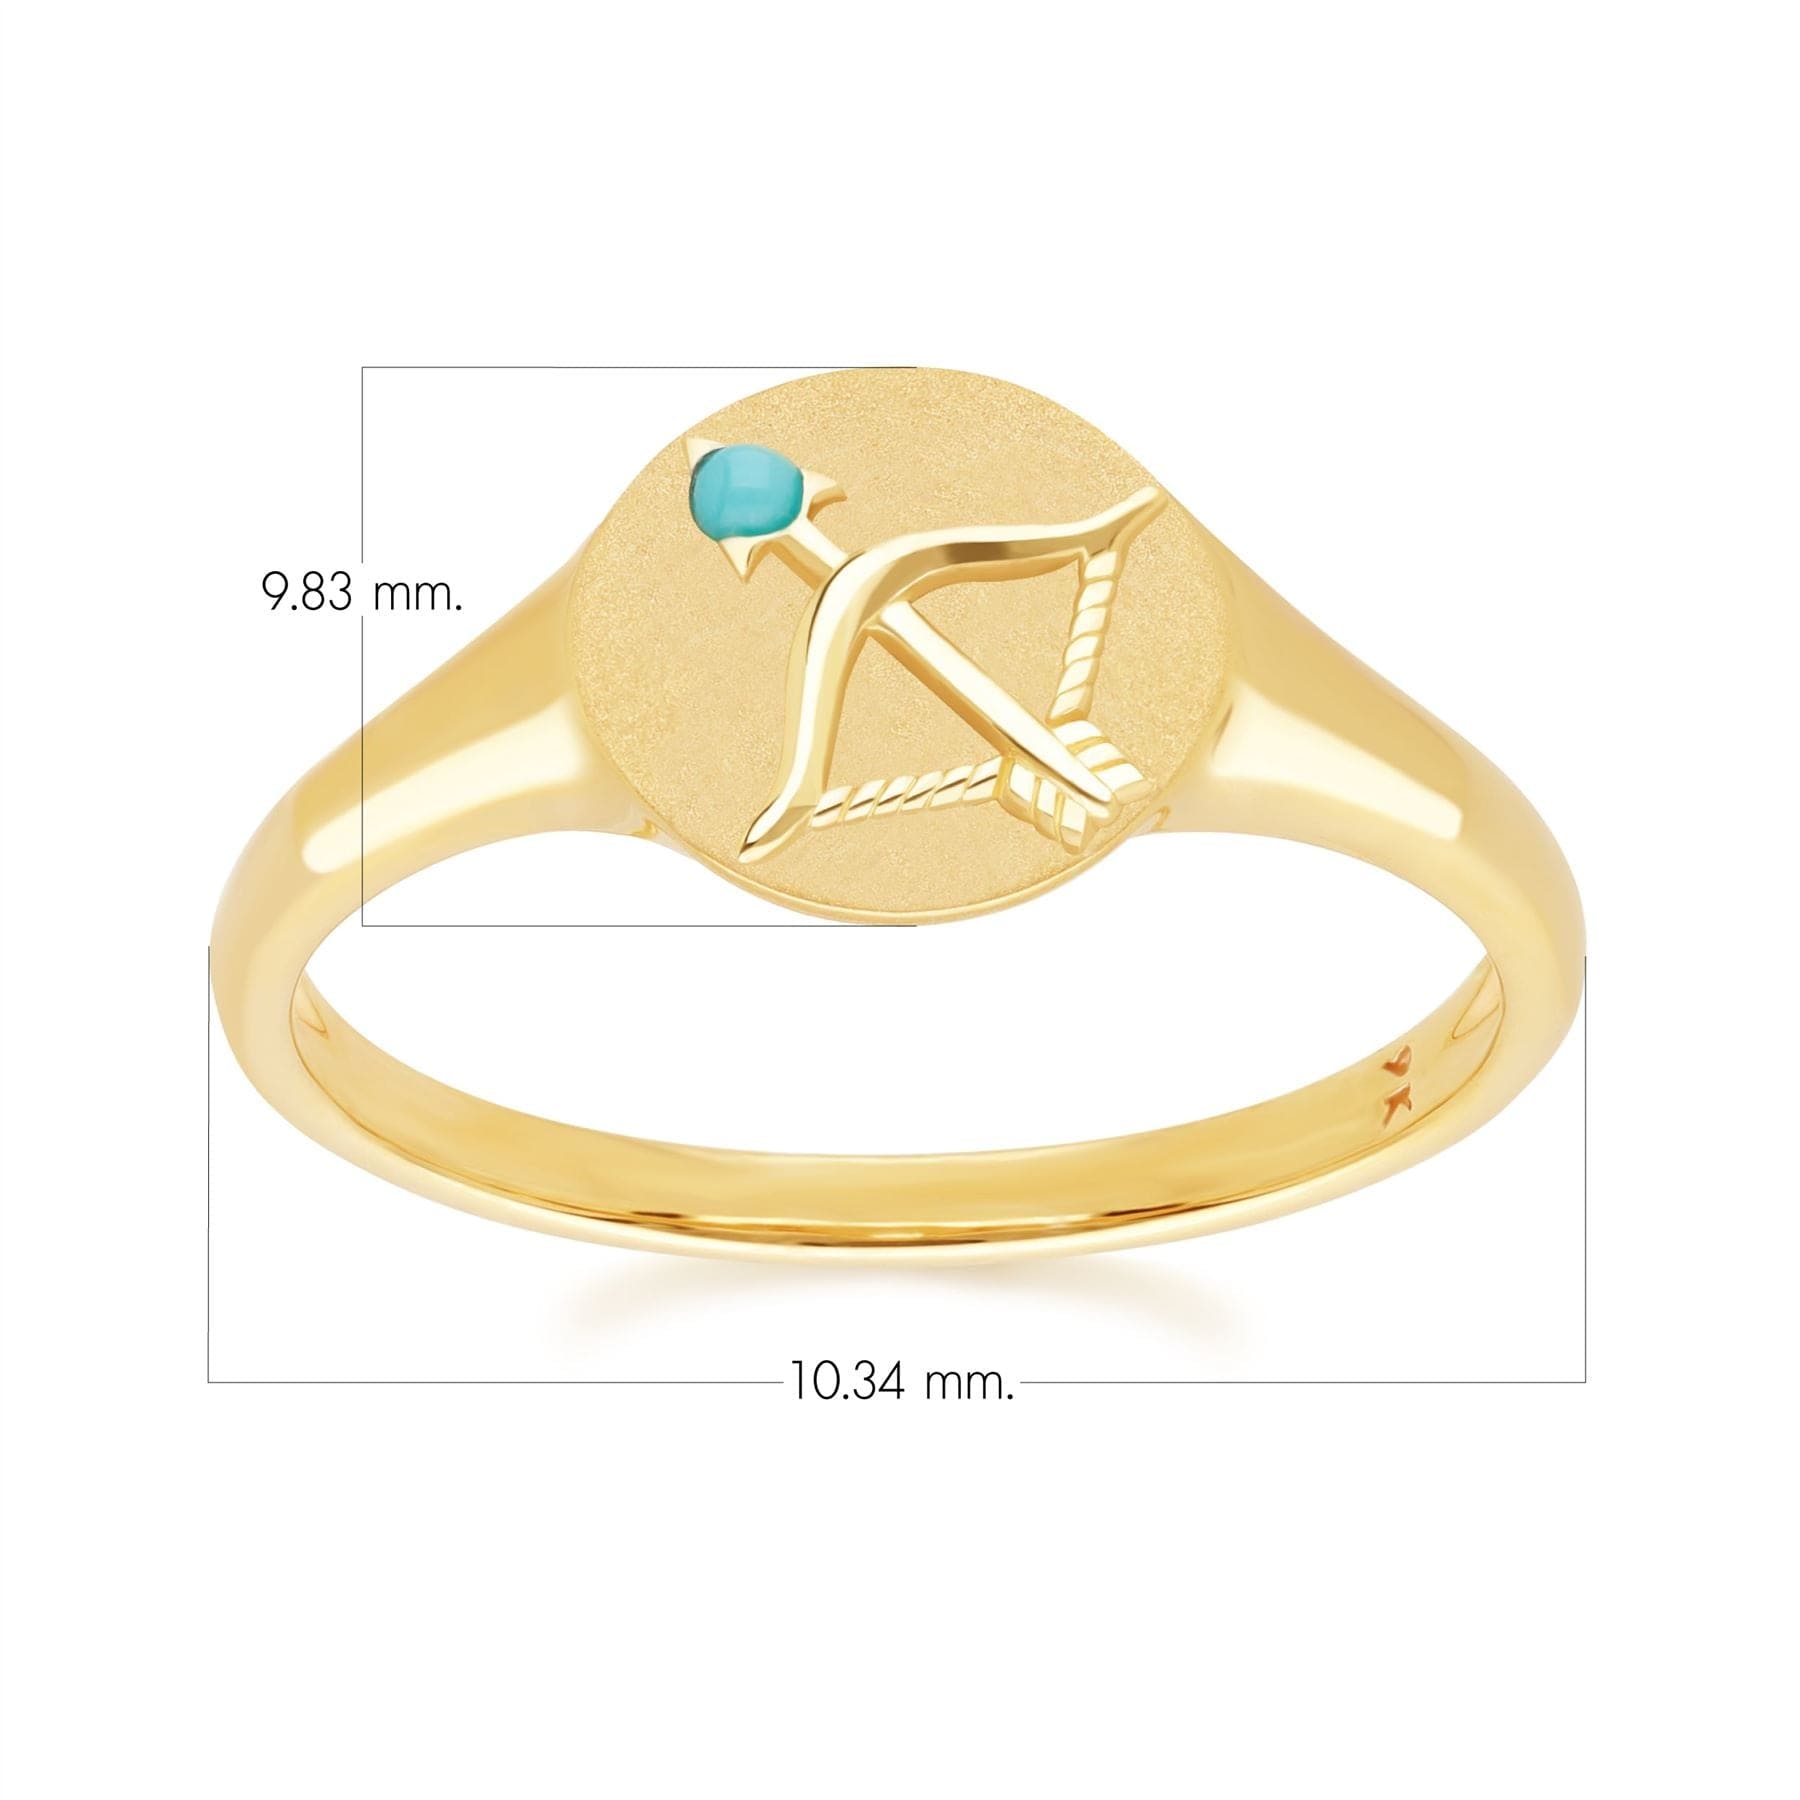 Zodiac turquoise Sagittarius Signet Ring In 9ct Yellow Gold Dimensions 